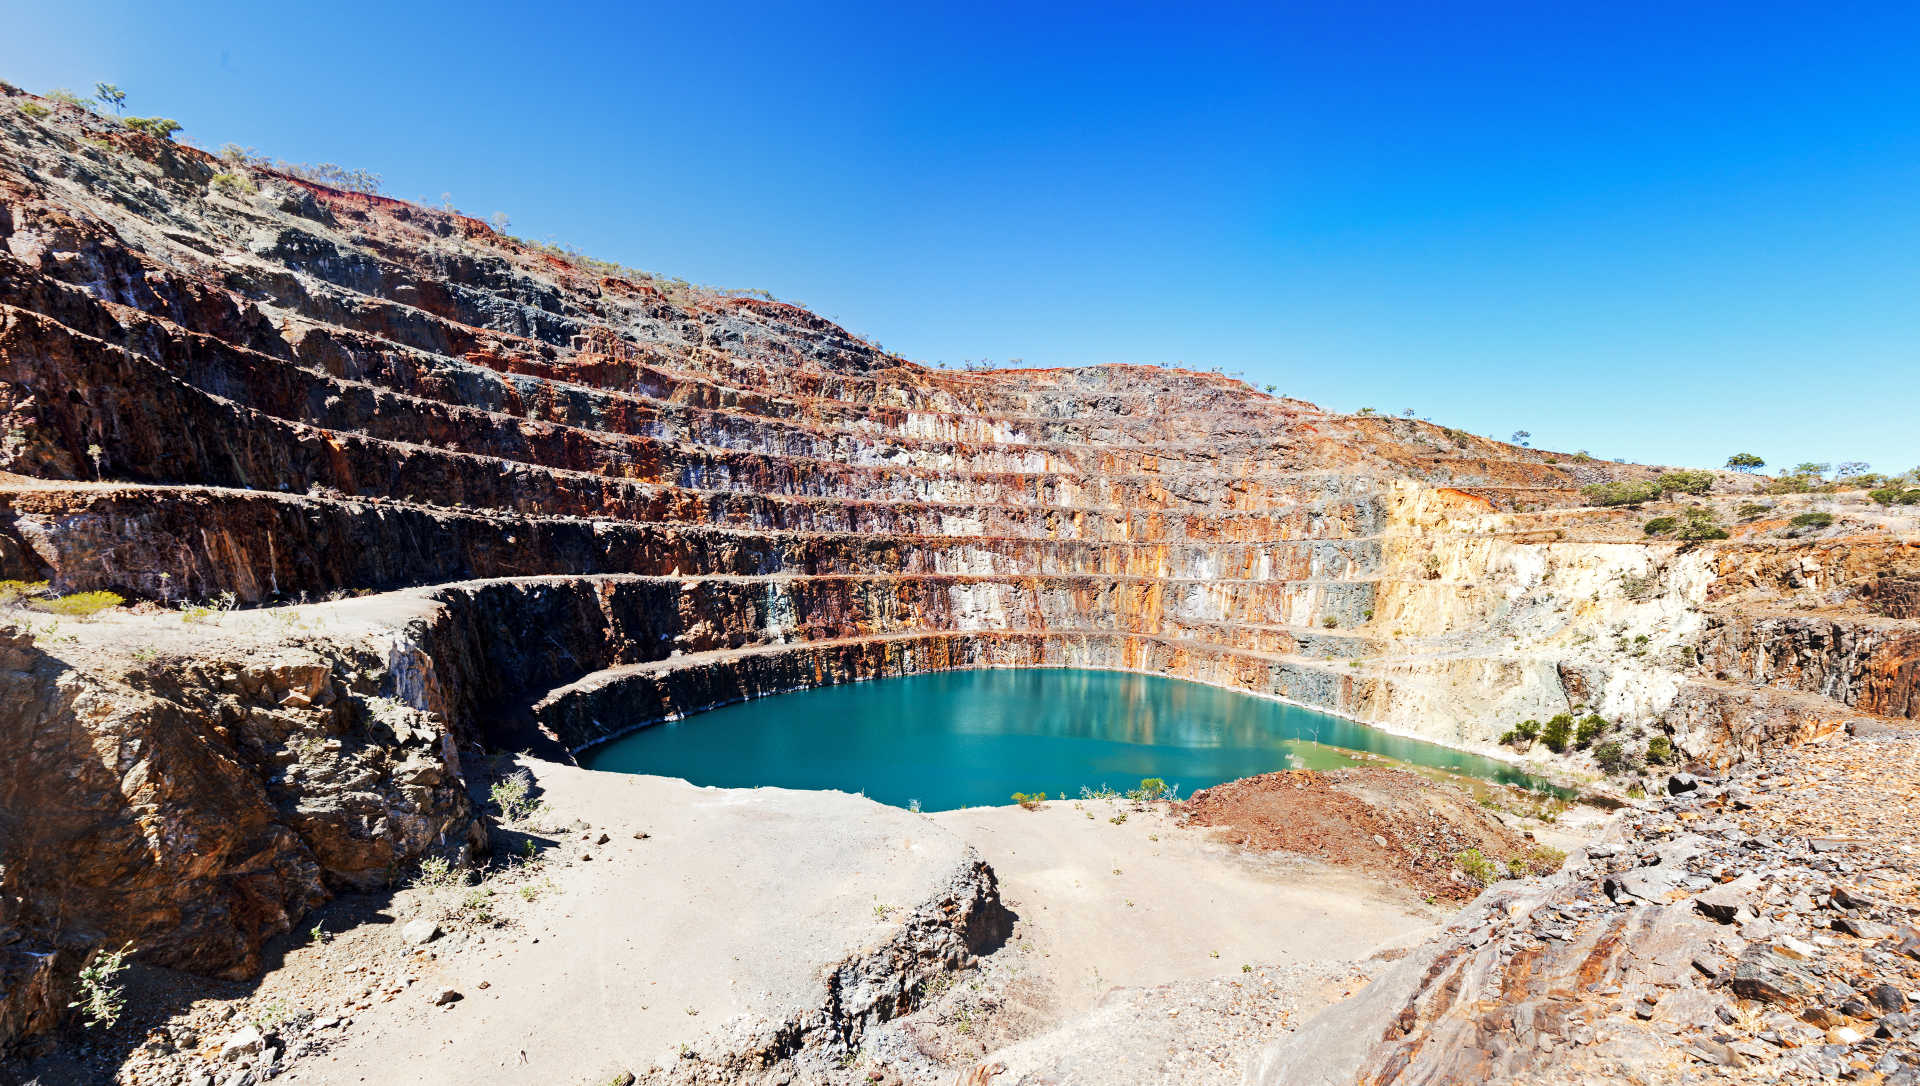 Water plays a vital part in the mining process - let's find out why...